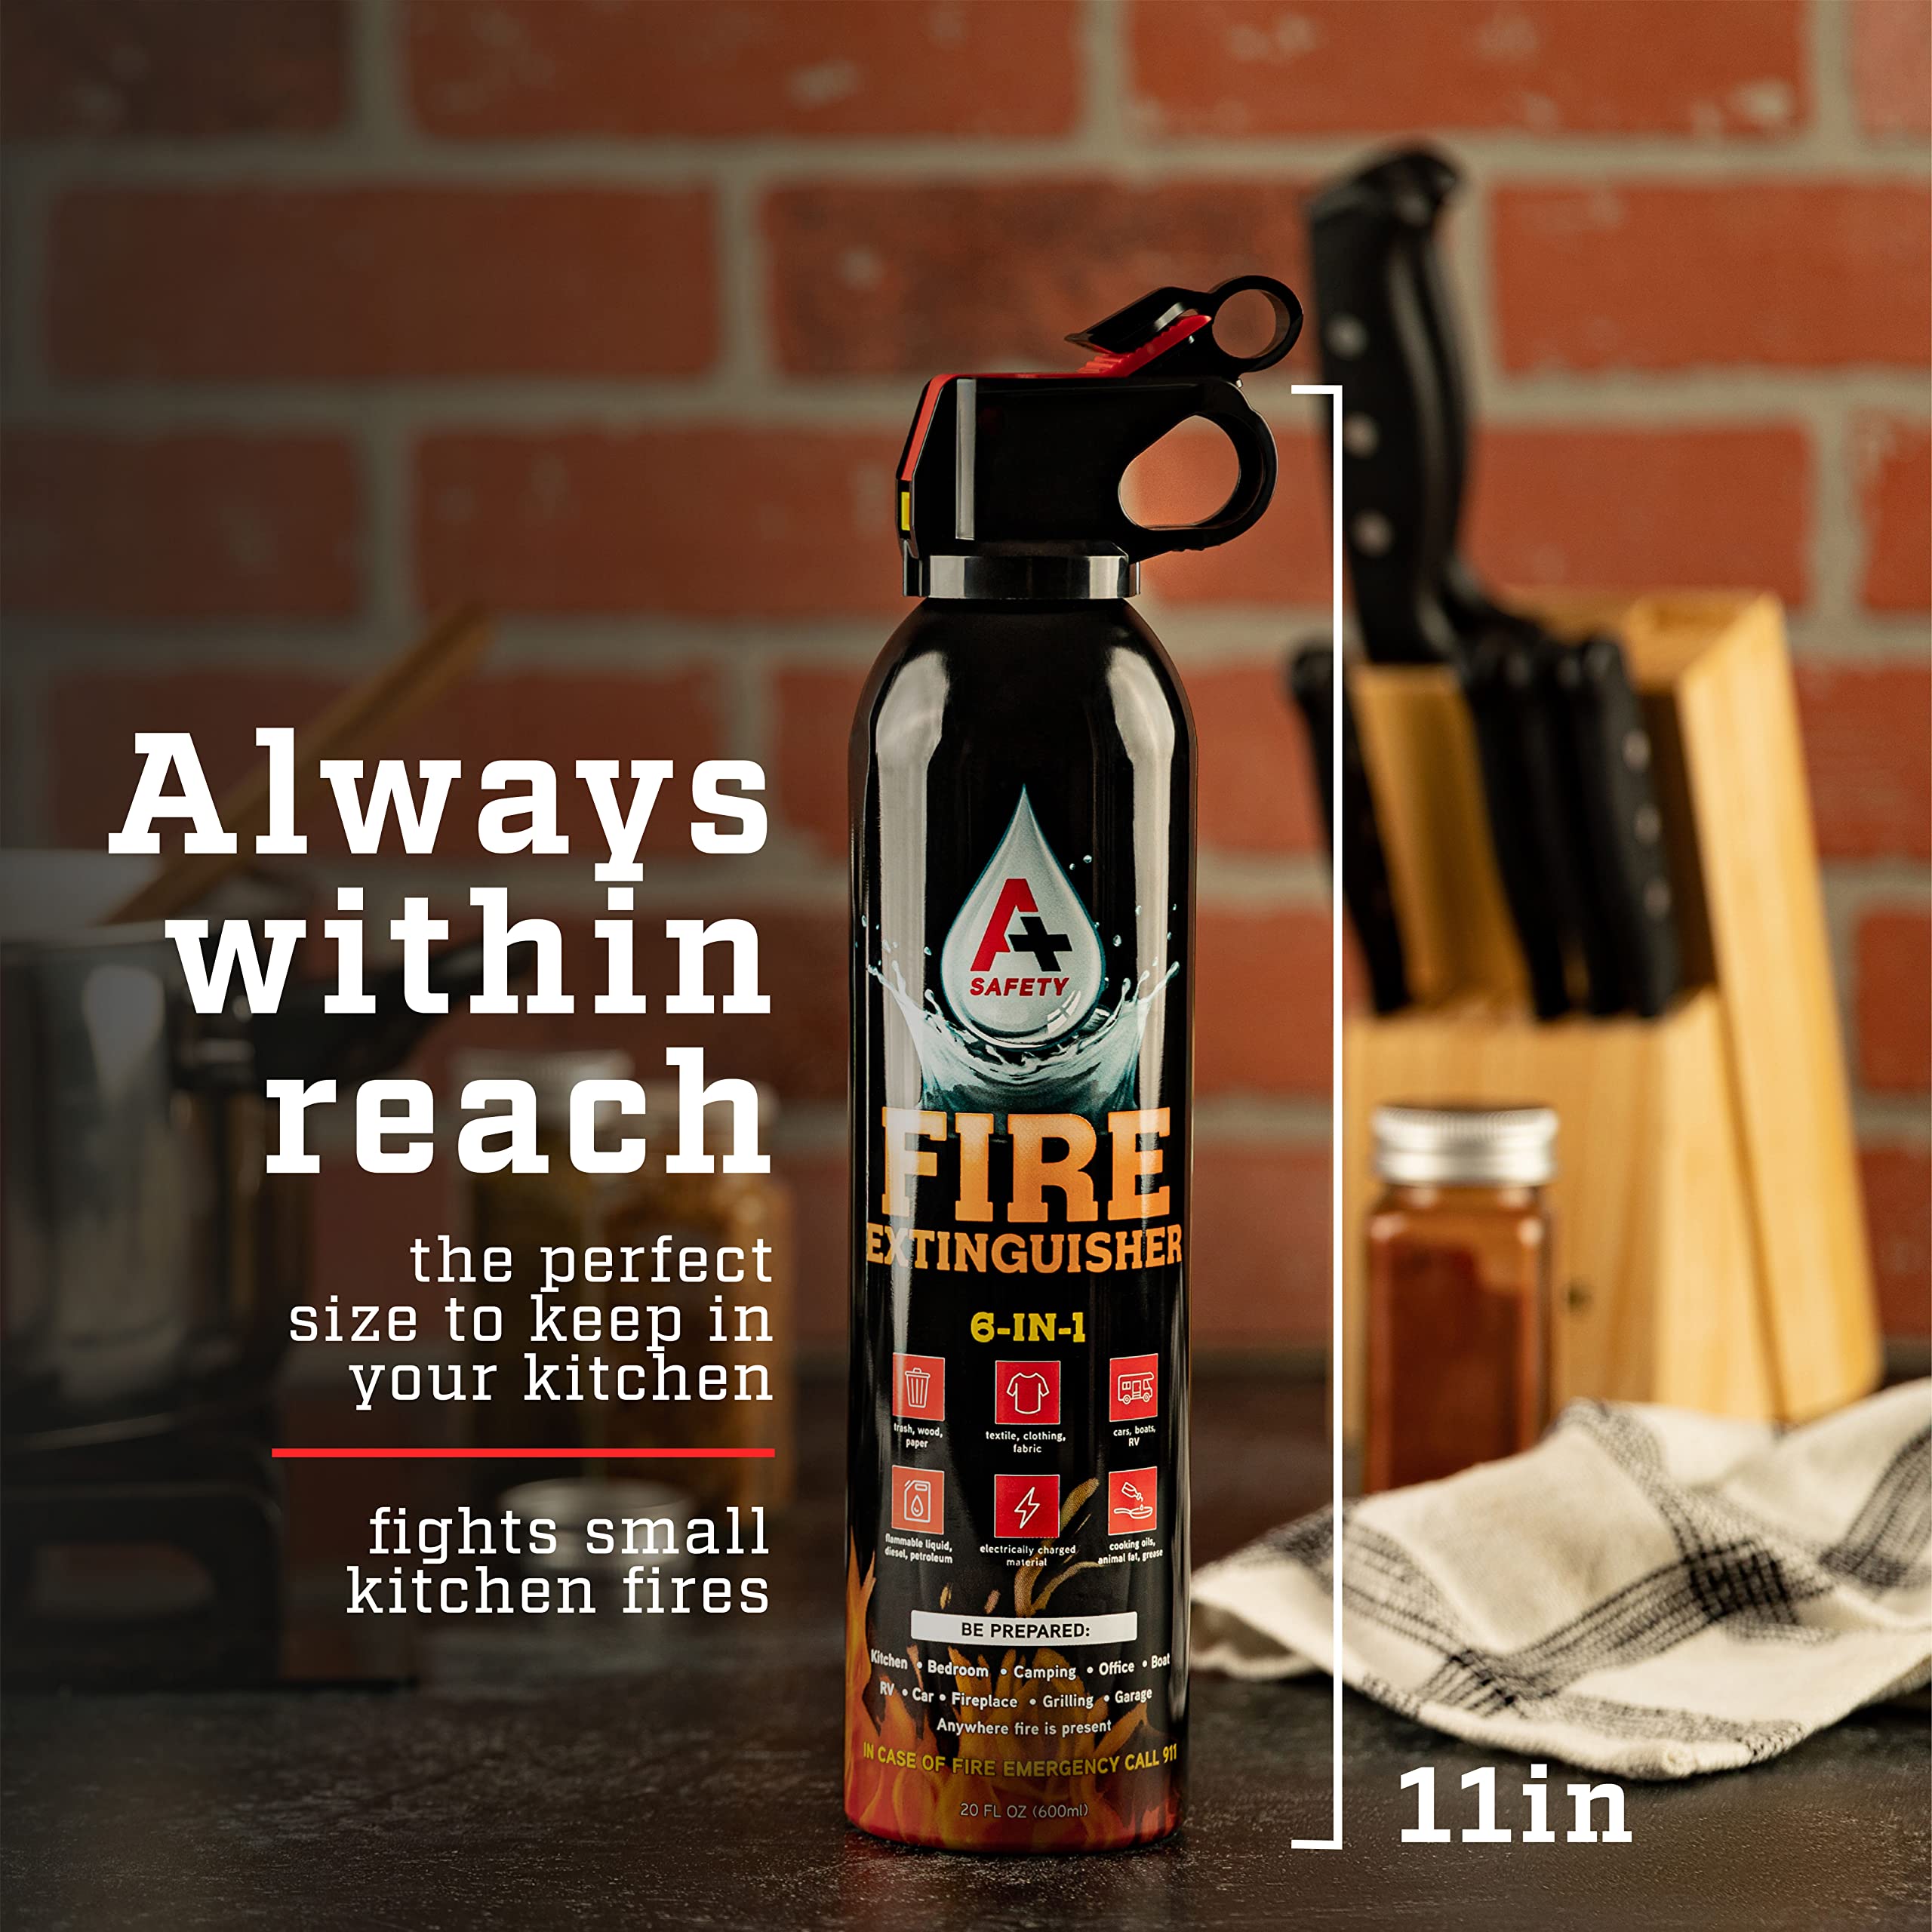 A+ Safety Portable Fire Extinguisher | 6-in-1 Small Fire Extinguisher for Home, Garage, Kitchen, Car | For Electric, Textile and Grease Fires | Non-Toxic, Easy Clean | Wall Mount Incl (2PK)